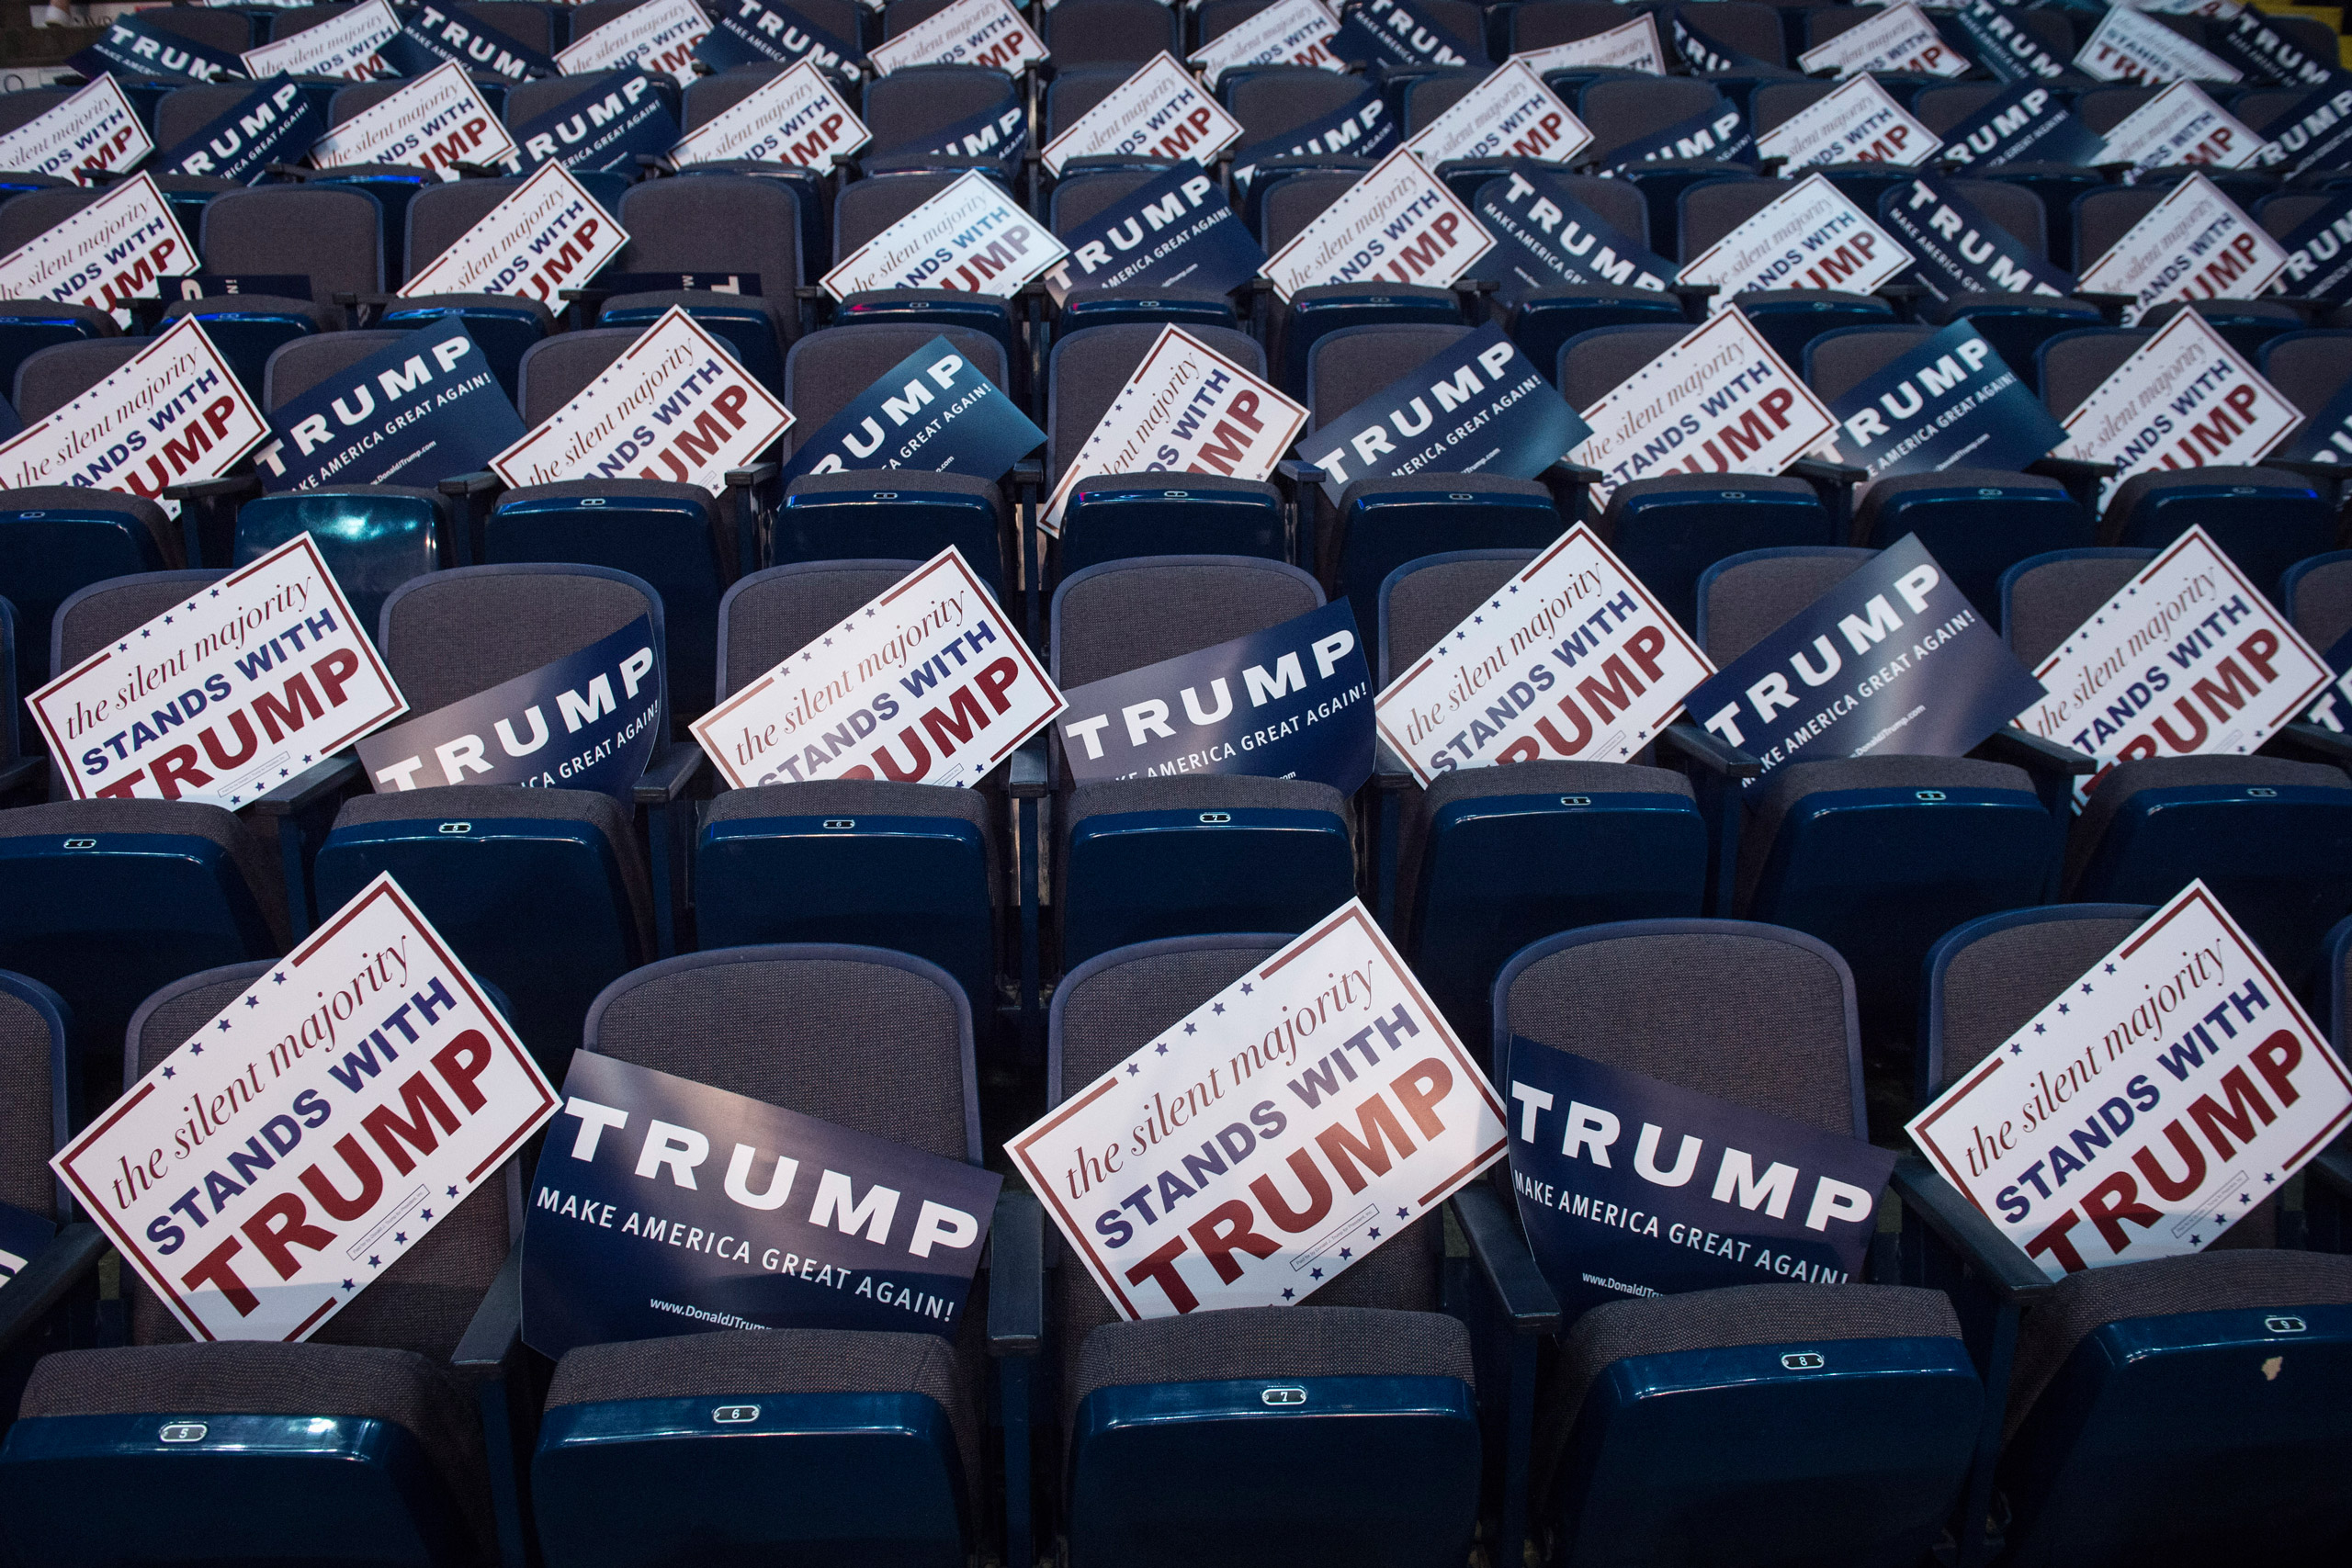 Signs are seen in empty seats before republican presidential candidate Donald Trump speaks during a campaign event at the Times Union Center in Albany, NY on April 11, 2016. (Jabin Botsford—The Washington Post/Getty Images)